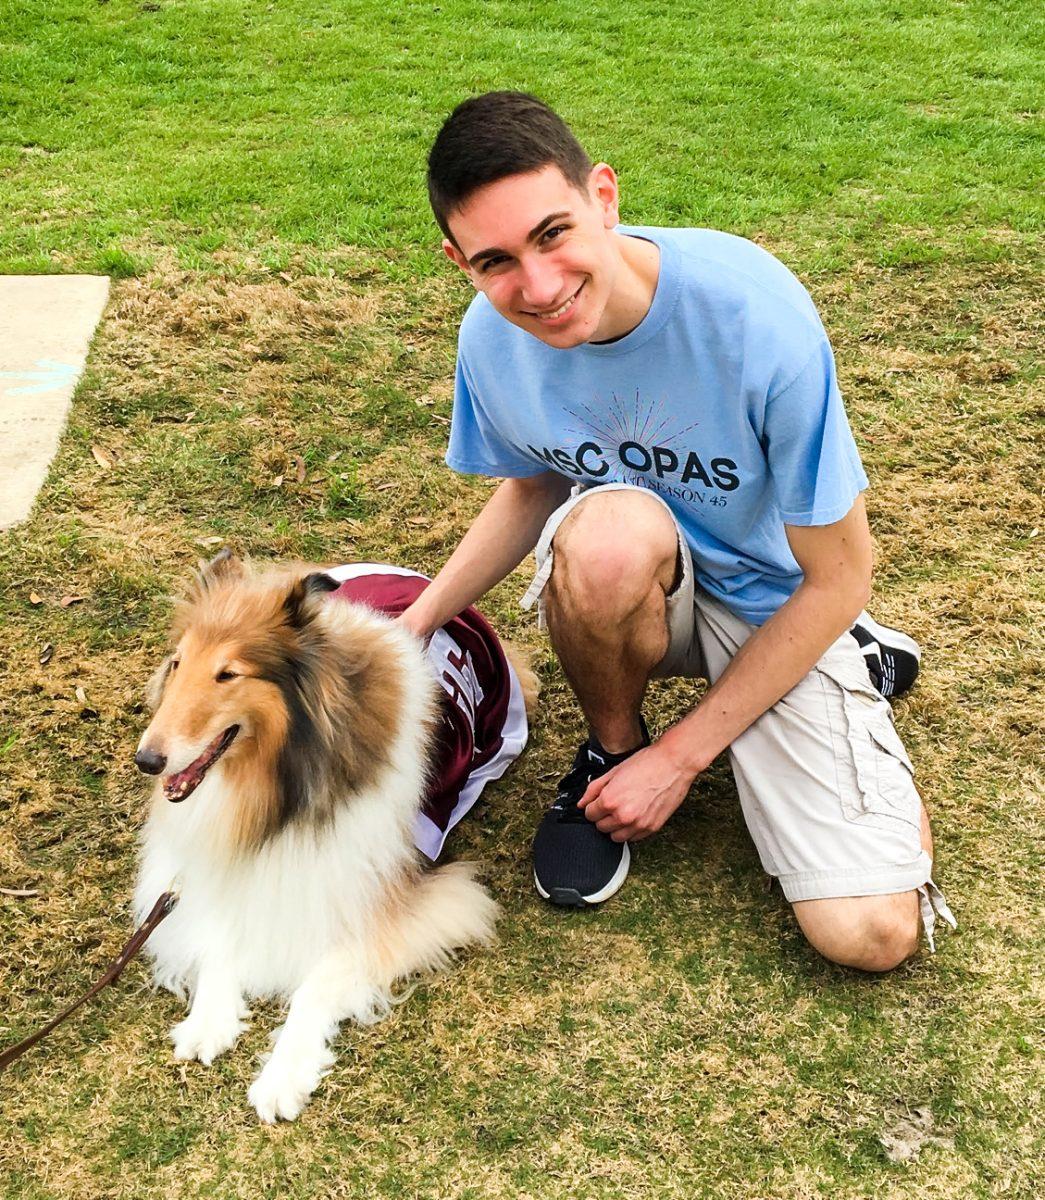 Agricultural communication and journalism senior Jacob Gauthier will receive his Aggie Ring on Friday, Nov. 20 at 10 a.m.